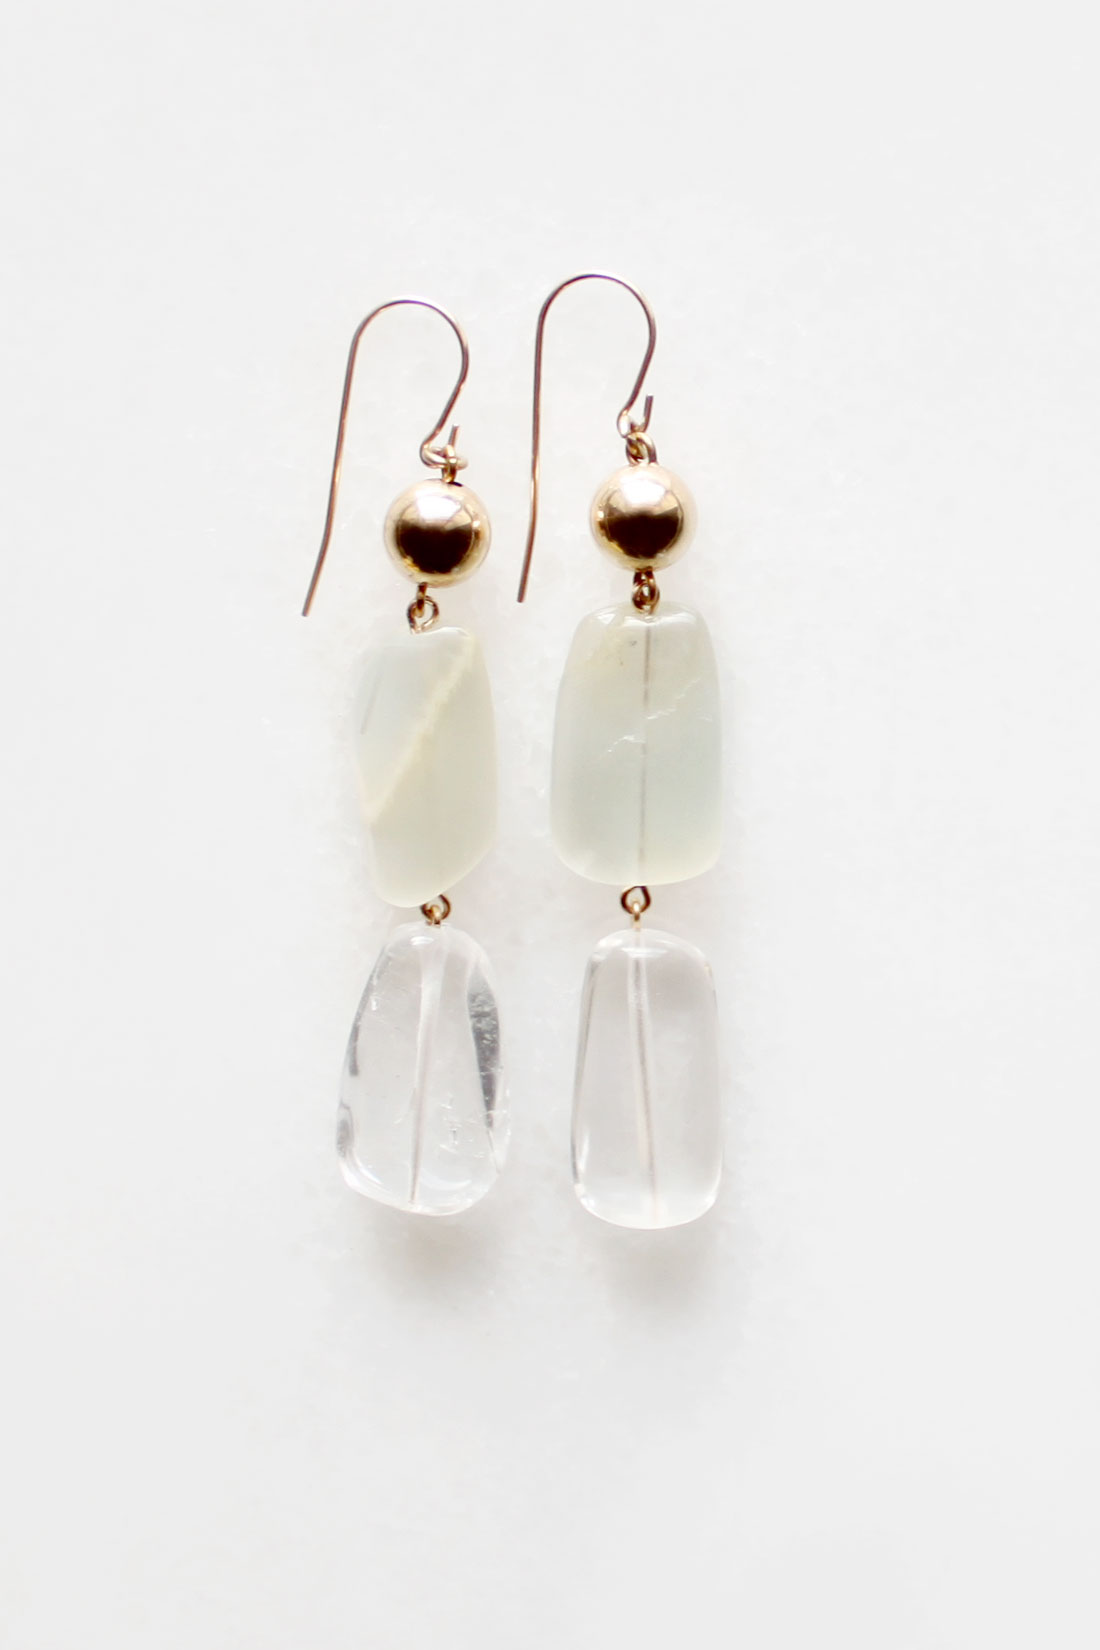 Moonstone and Quartz Tiered Earrings by The Vamoose